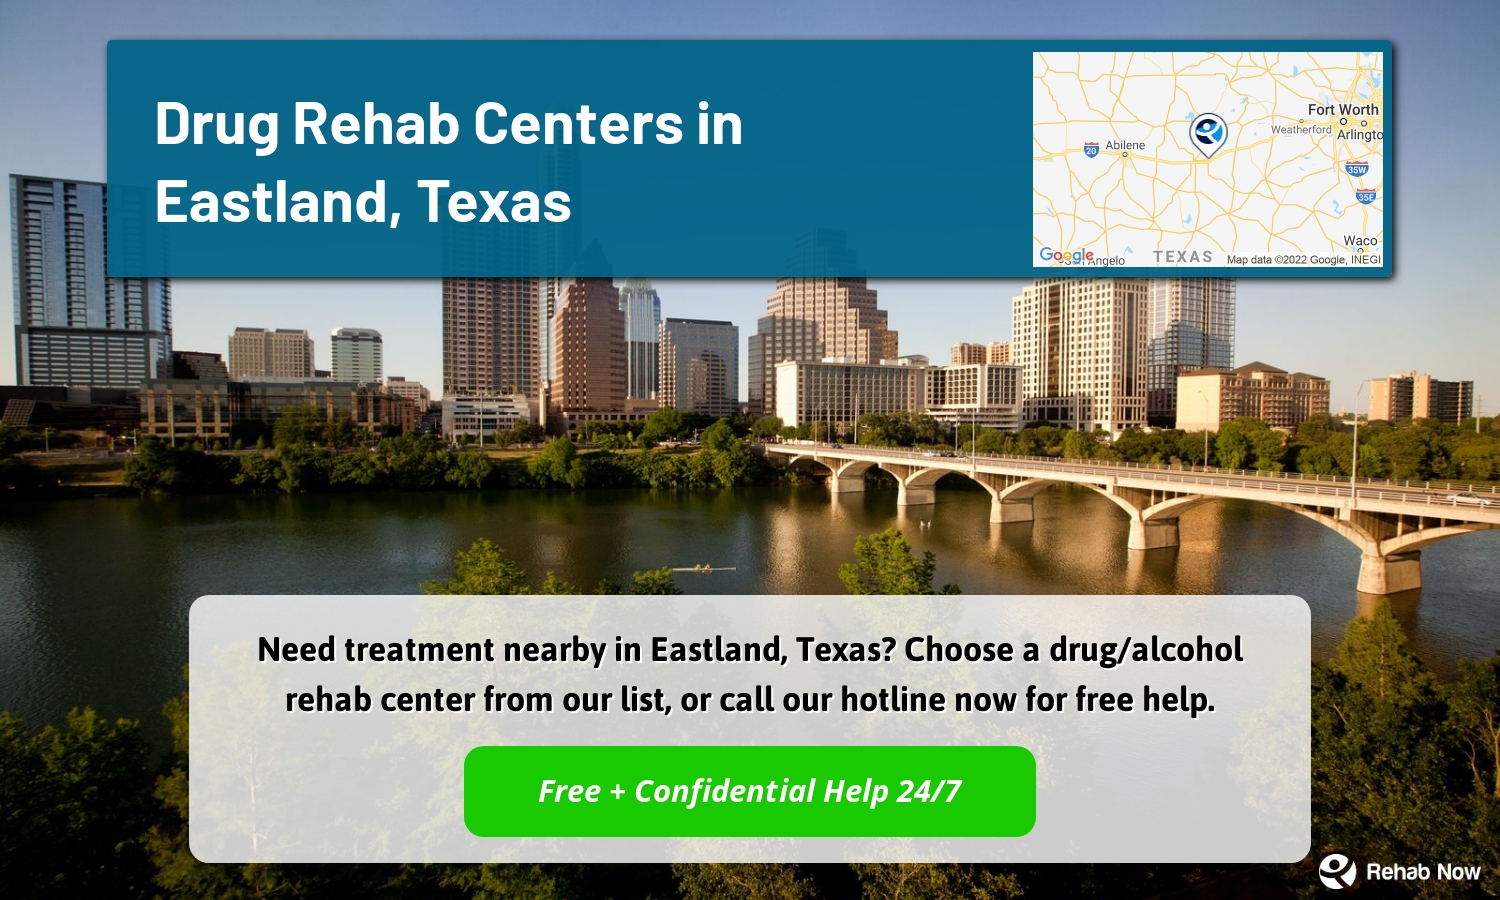 Need treatment nearby in Eastland, Texas? Choose a drug/alcohol rehab center from our list, or call our hotline now for free help.